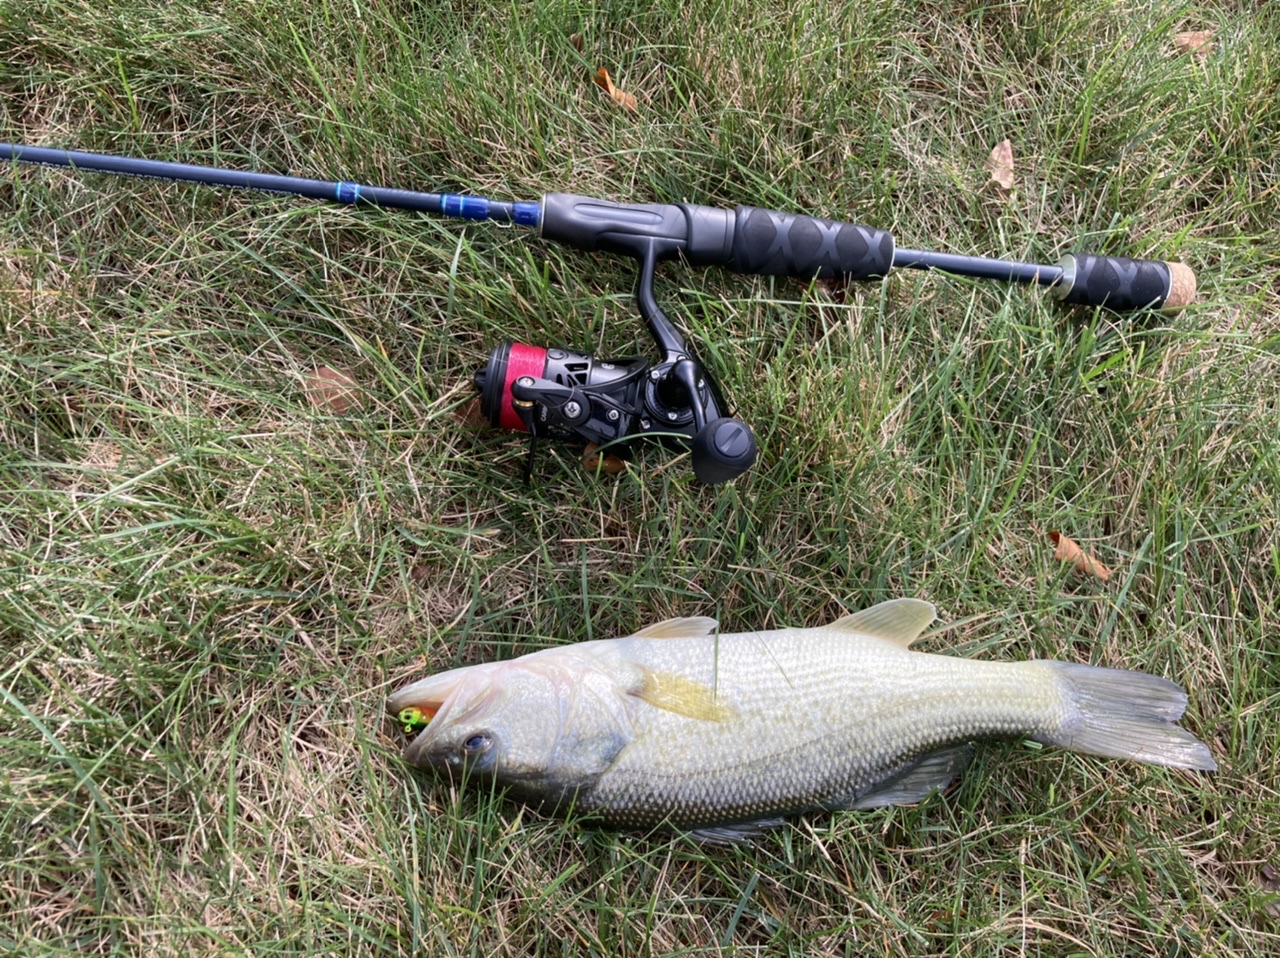 How should I set up my rods for bass fishing and maybe some crappie/bluegill?  : r/FishingForBeginners